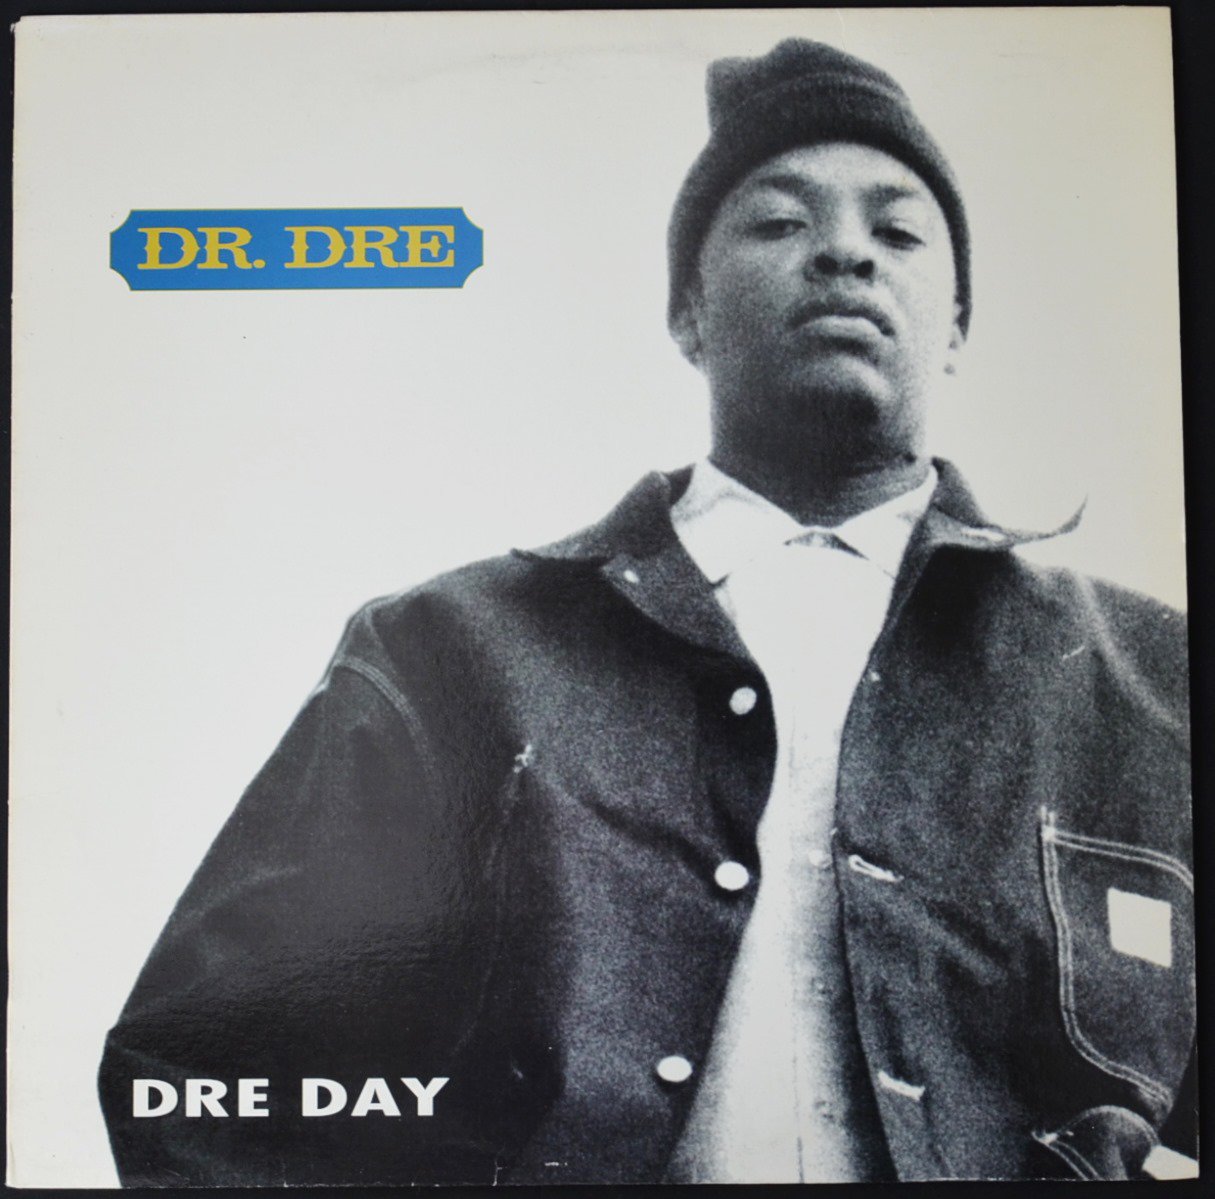 DR. DRE ‎/ DRE DAY / ONE EIGHT SEVEN (FEAT.SNOOP DOGG) (12